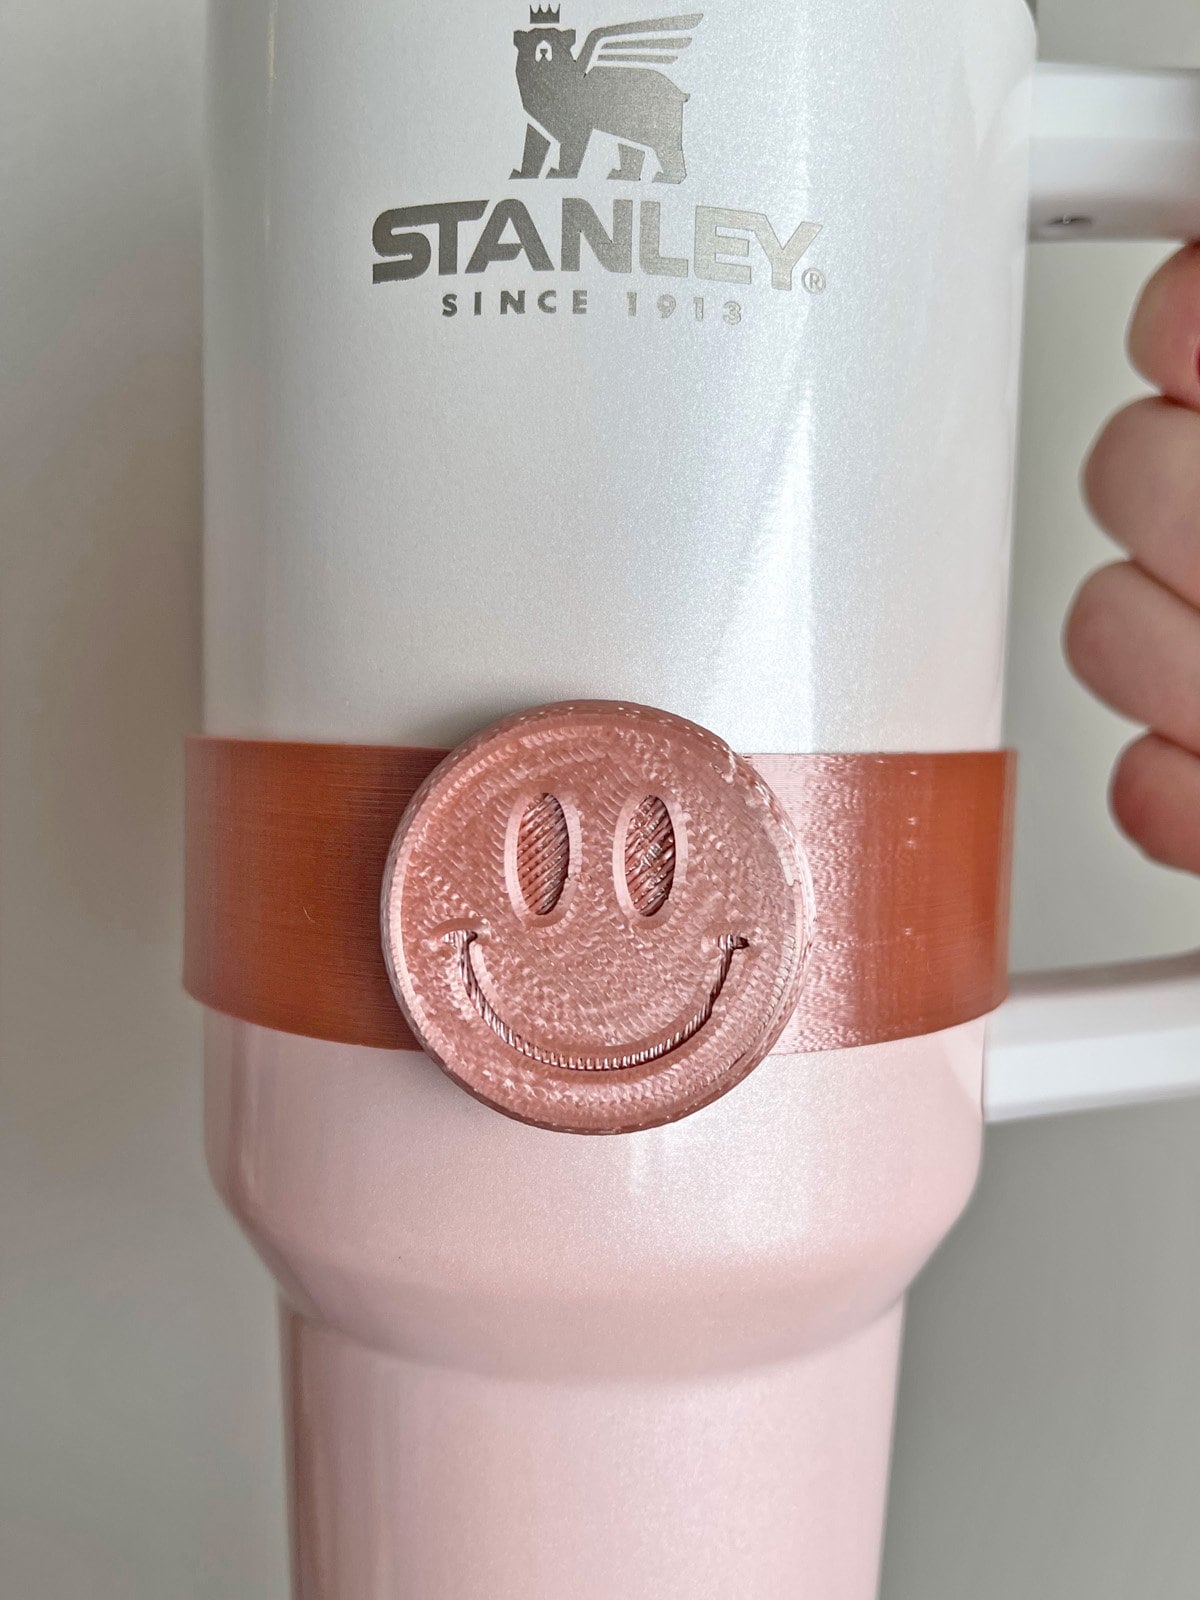 Classic Mouse Character Band for Stanley Adventure / Quencher Cup